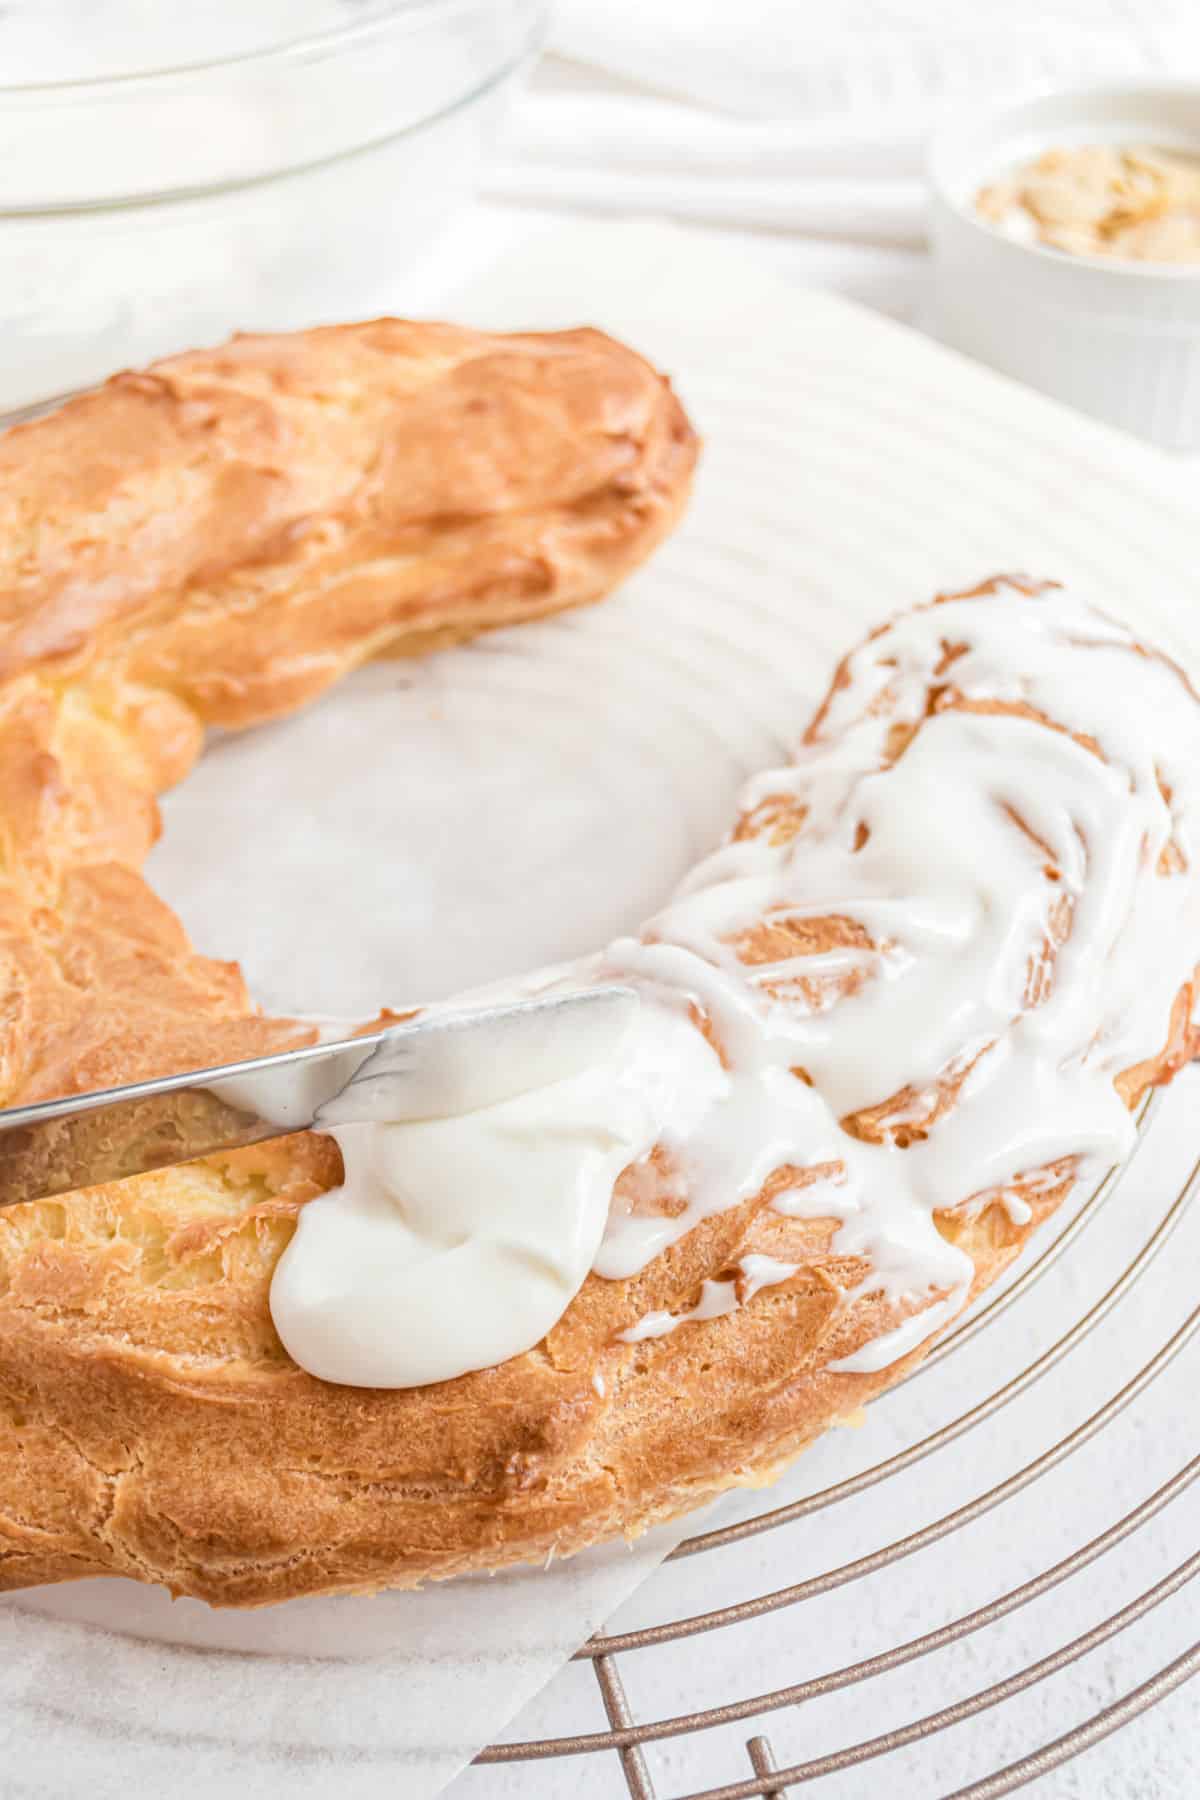 Almond icing being spread over a homemade kringle.